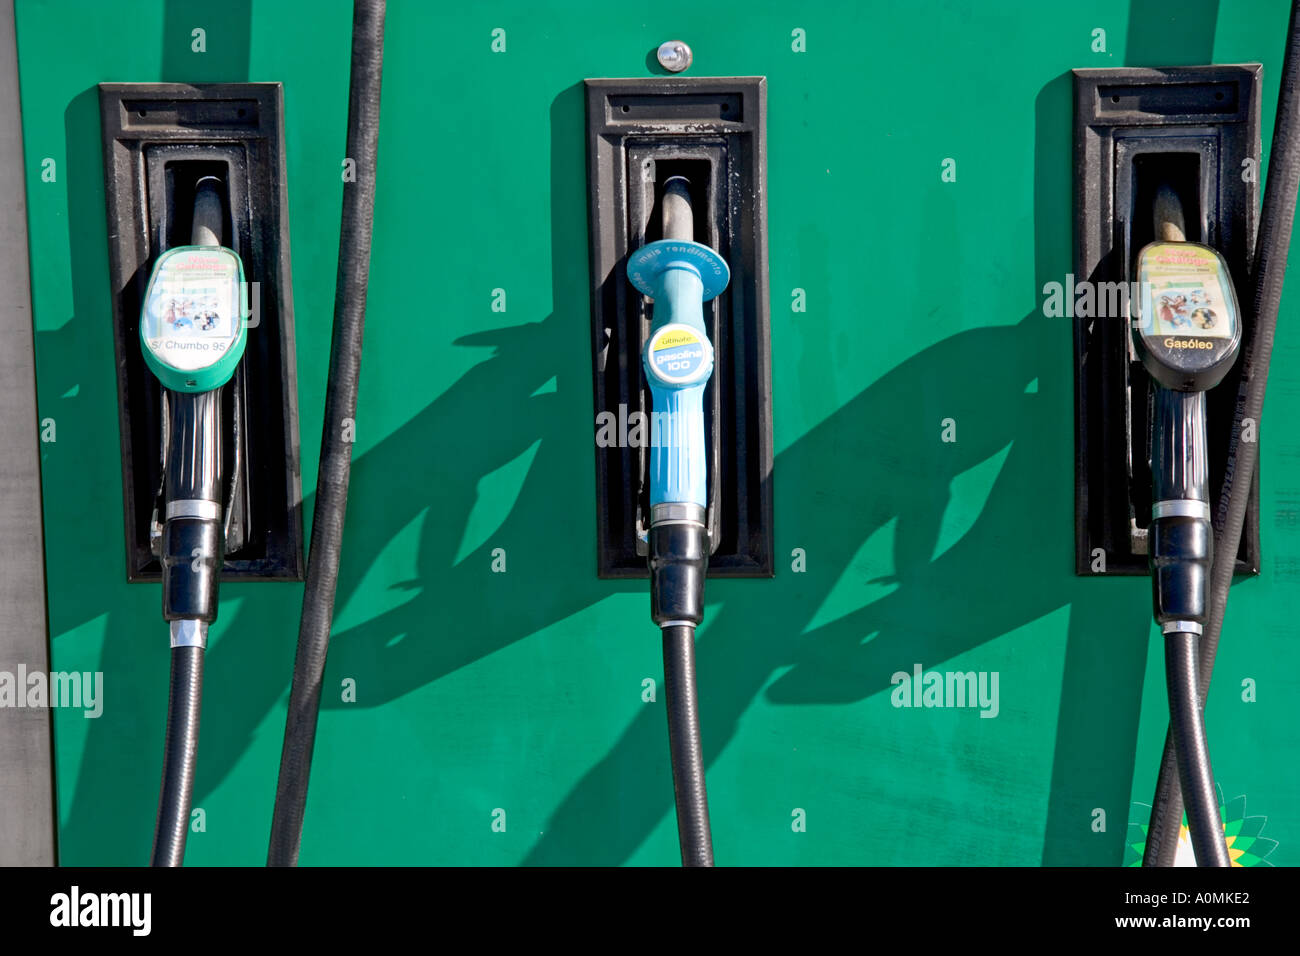 Gas Pumps in Portugal Stock Photo